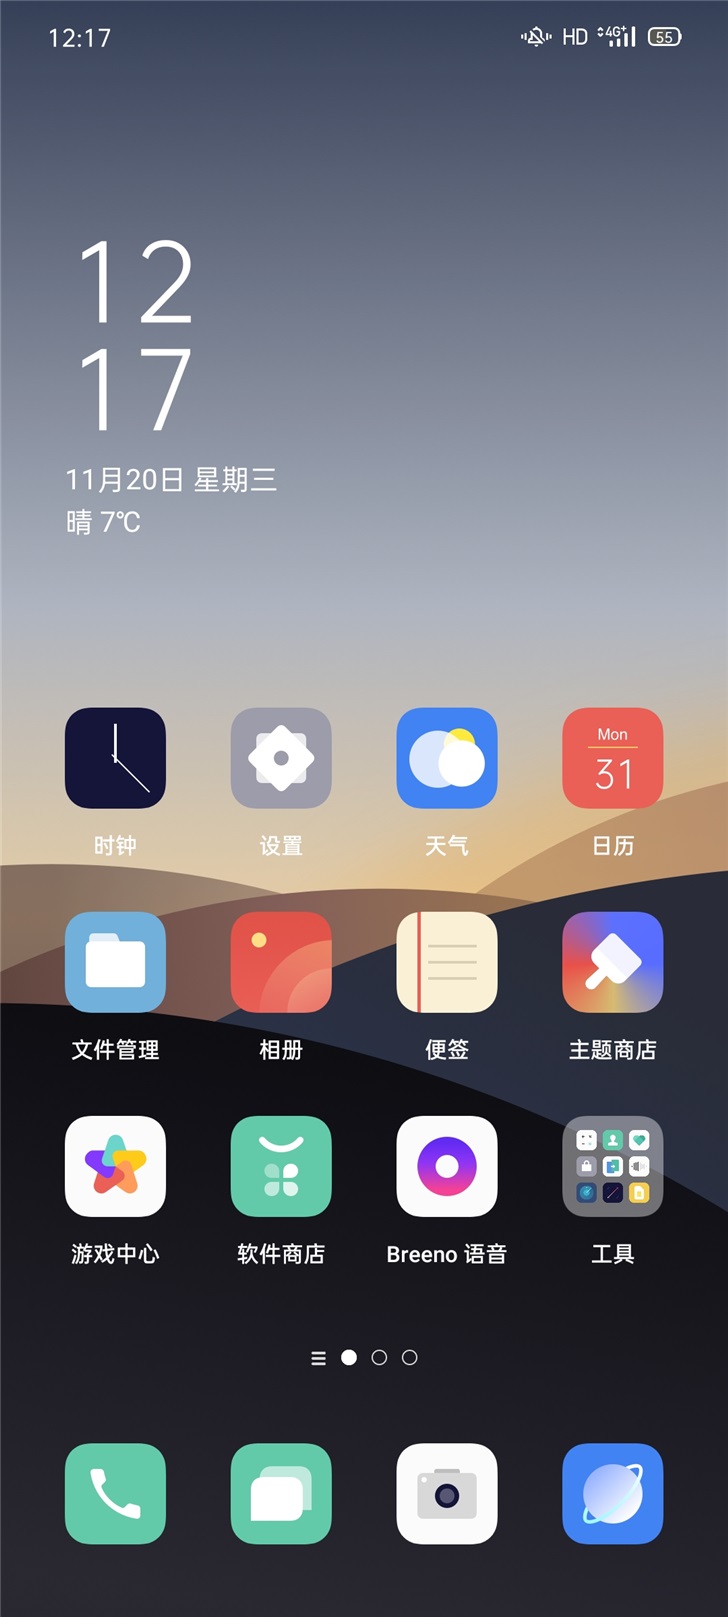 Oppo ColorOS 7 homepage